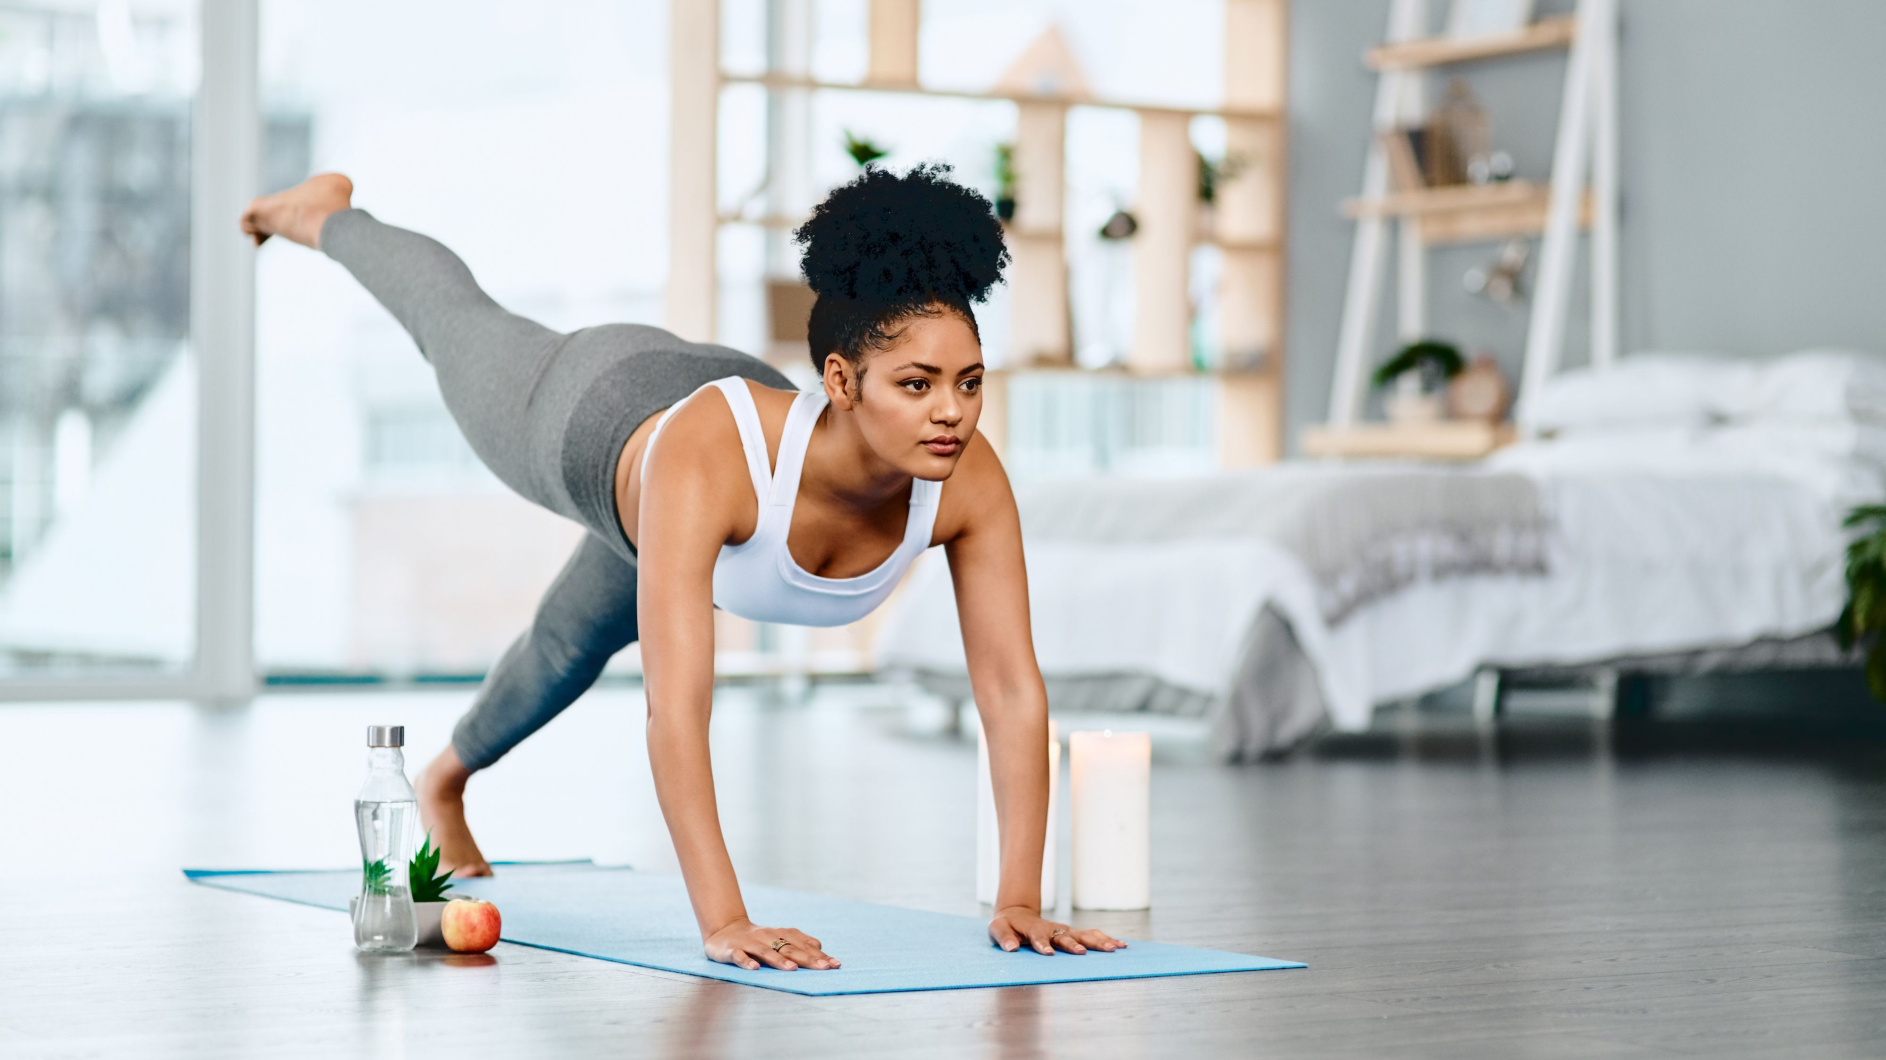 Pilates Instructor Training Online Vs. In-Person